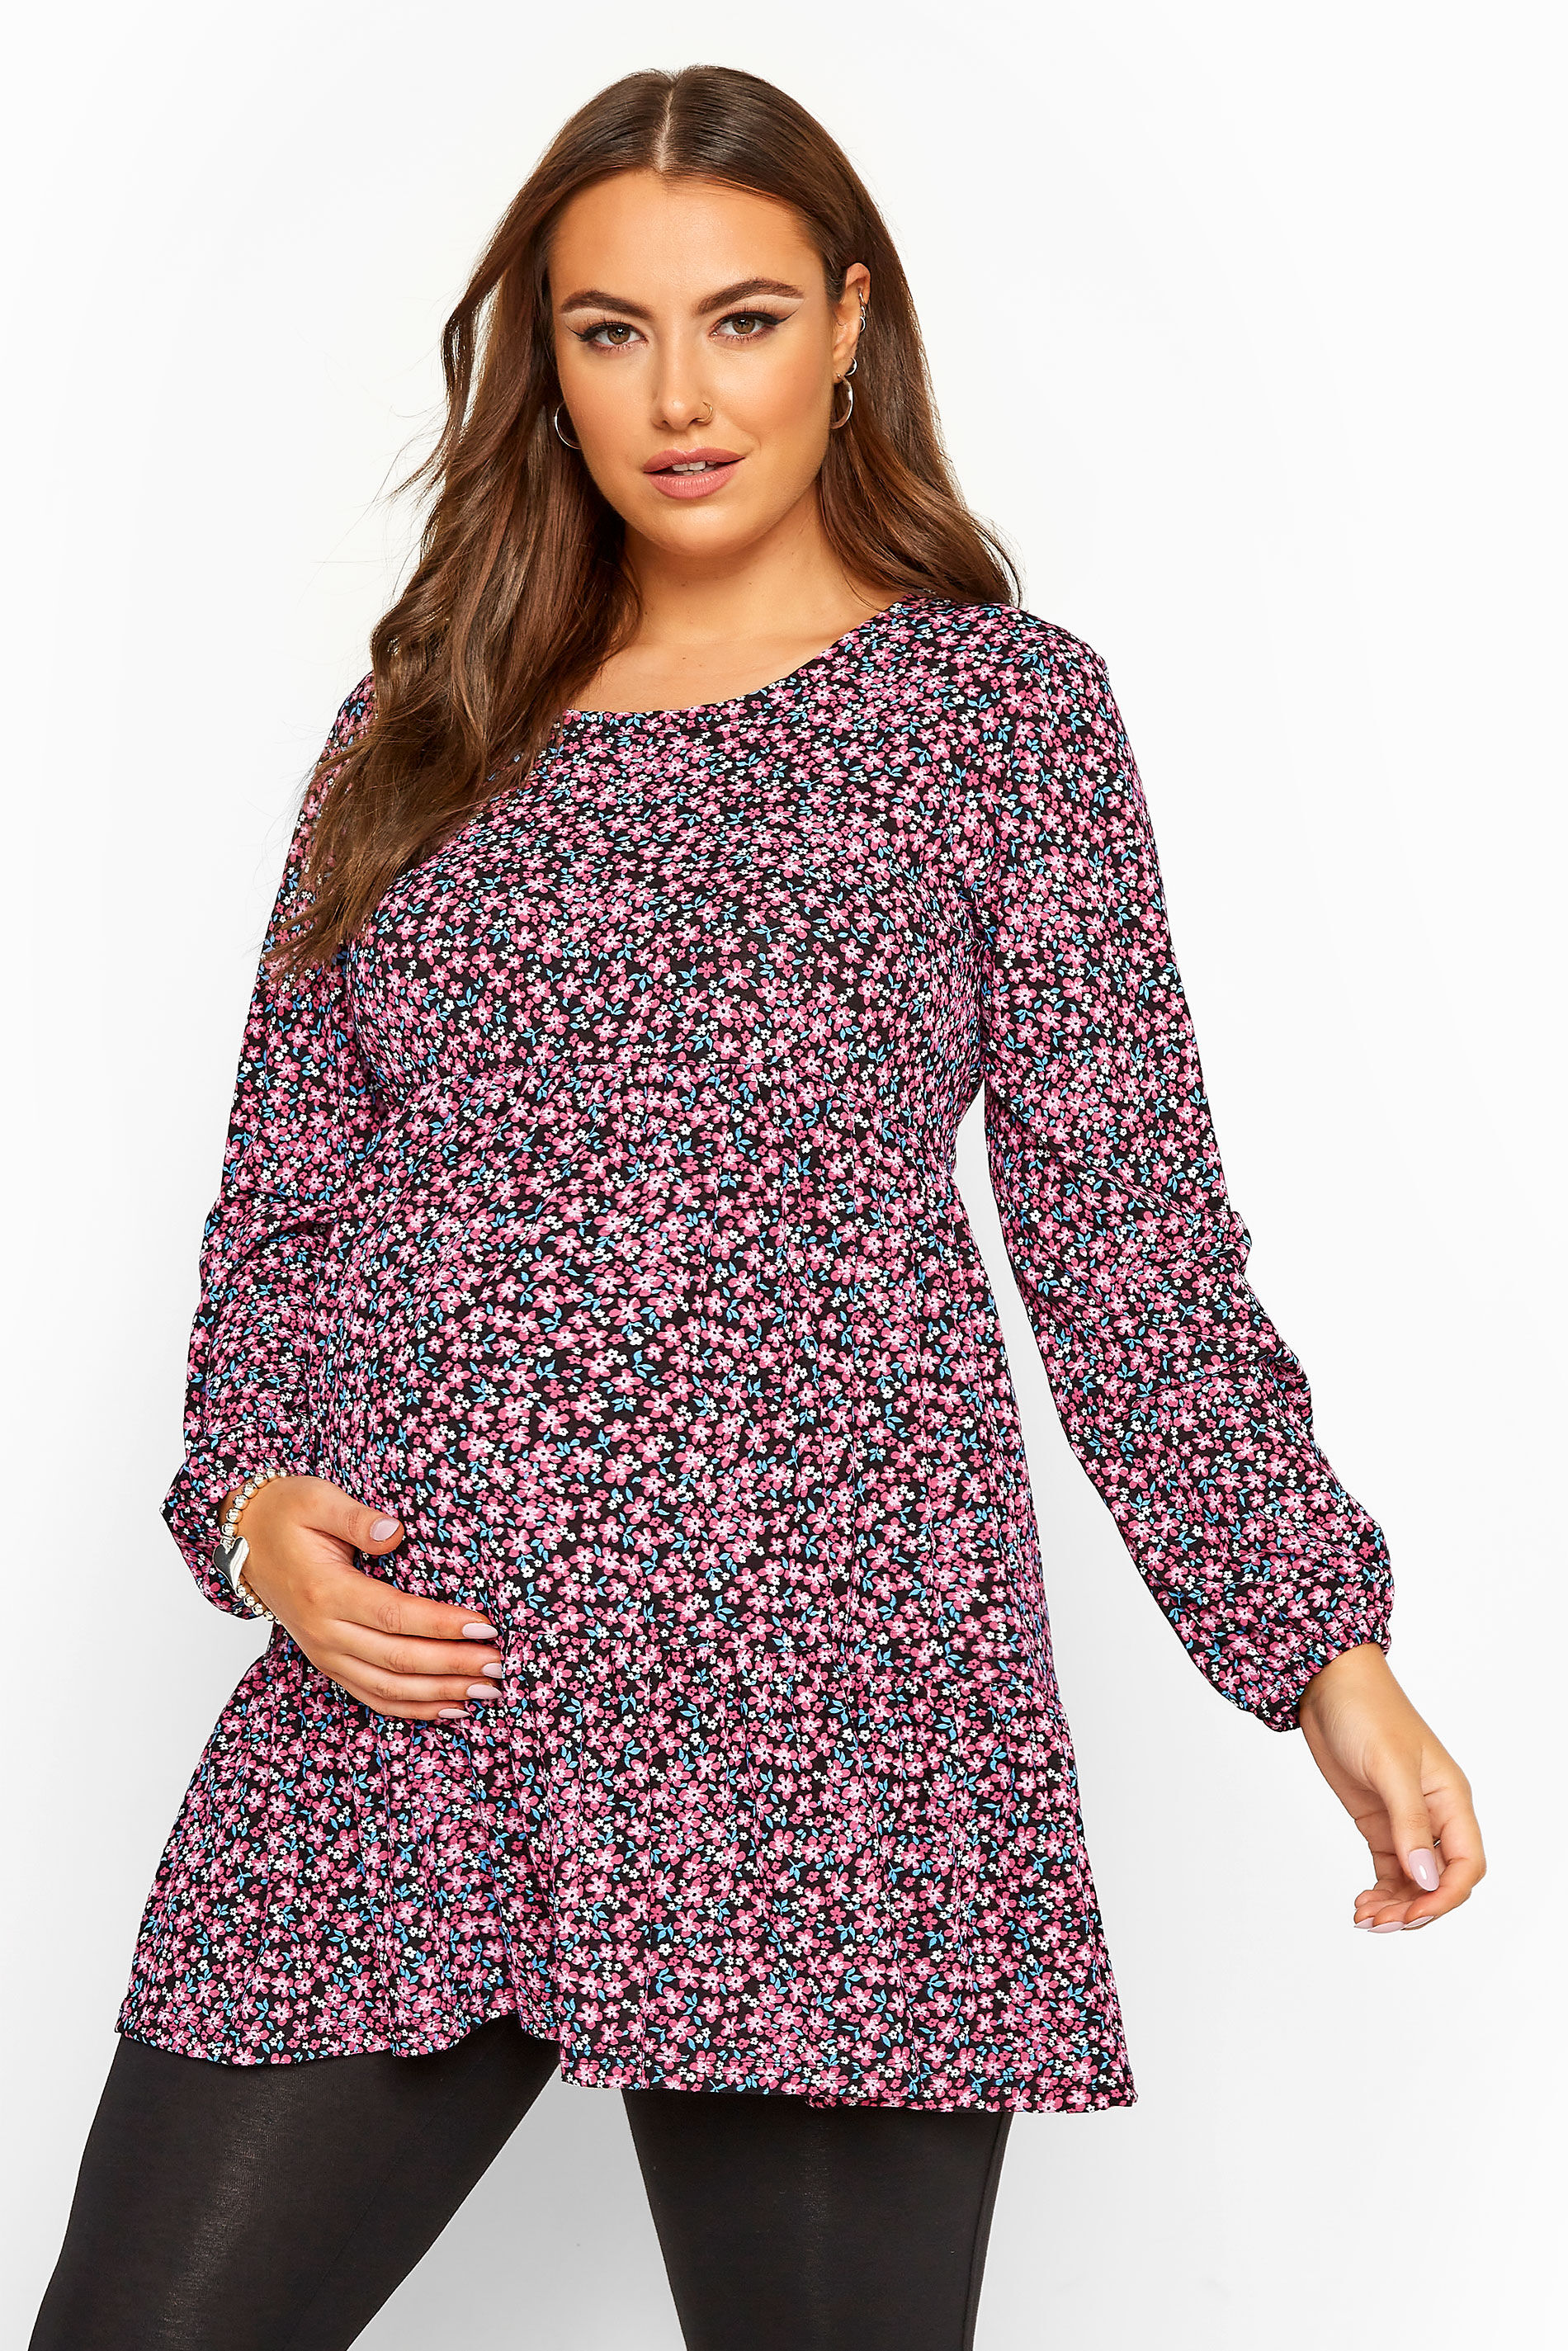 Yours Clothing Bump it up maternity multi floral tiered smock top